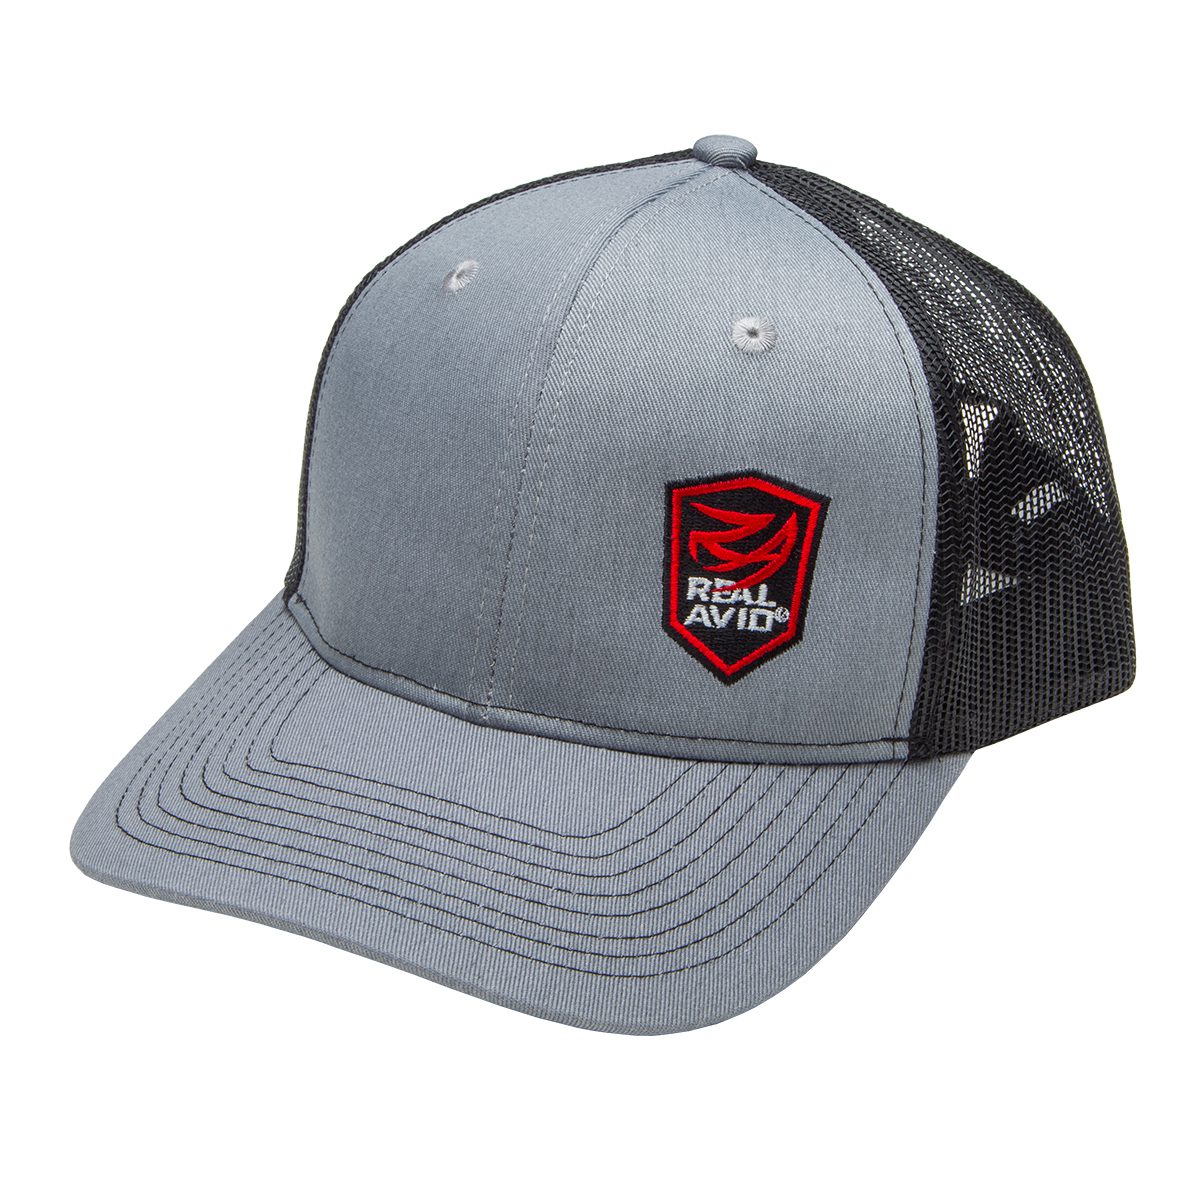 a gray and black trucker hat with the logo real avid